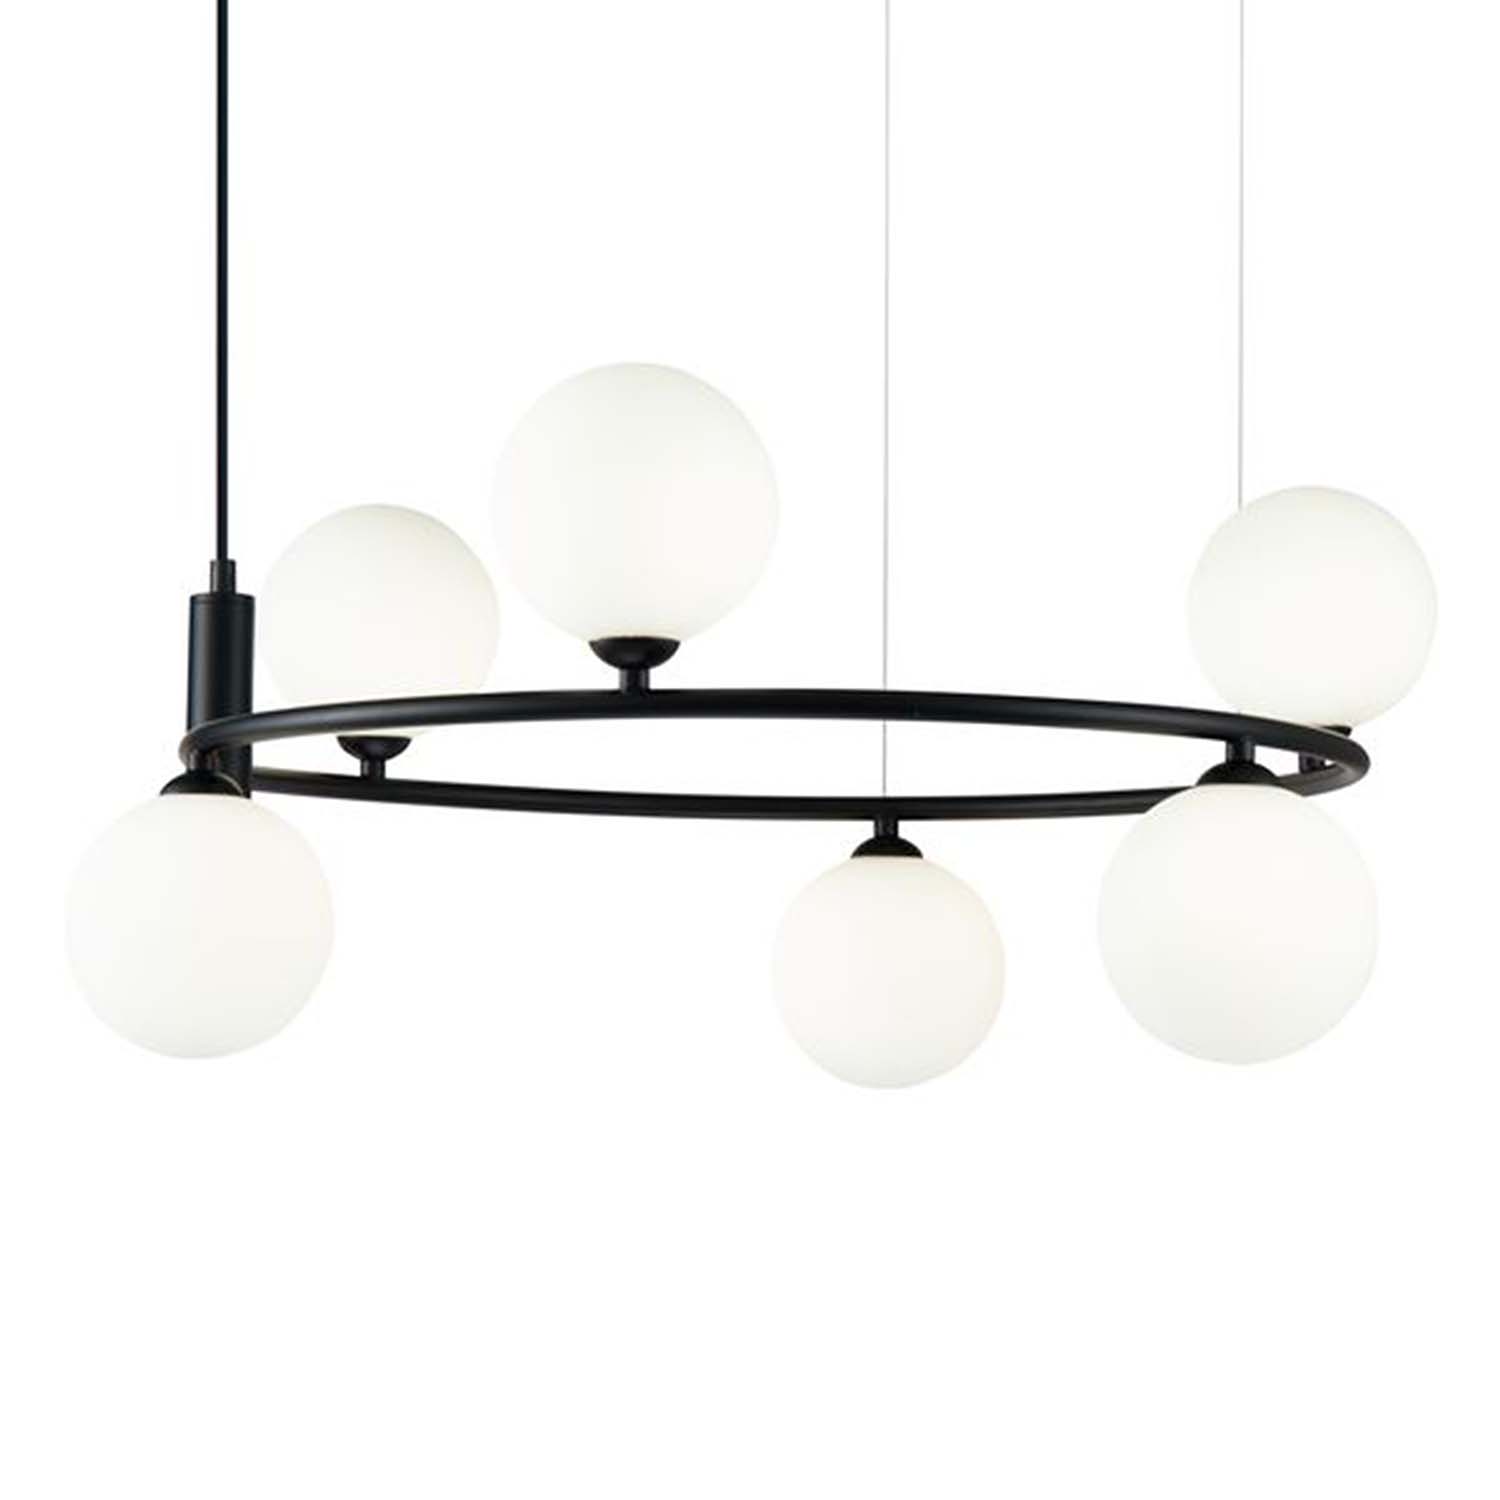 RING - Chic circular chandelier with glass balls, black, white or gold